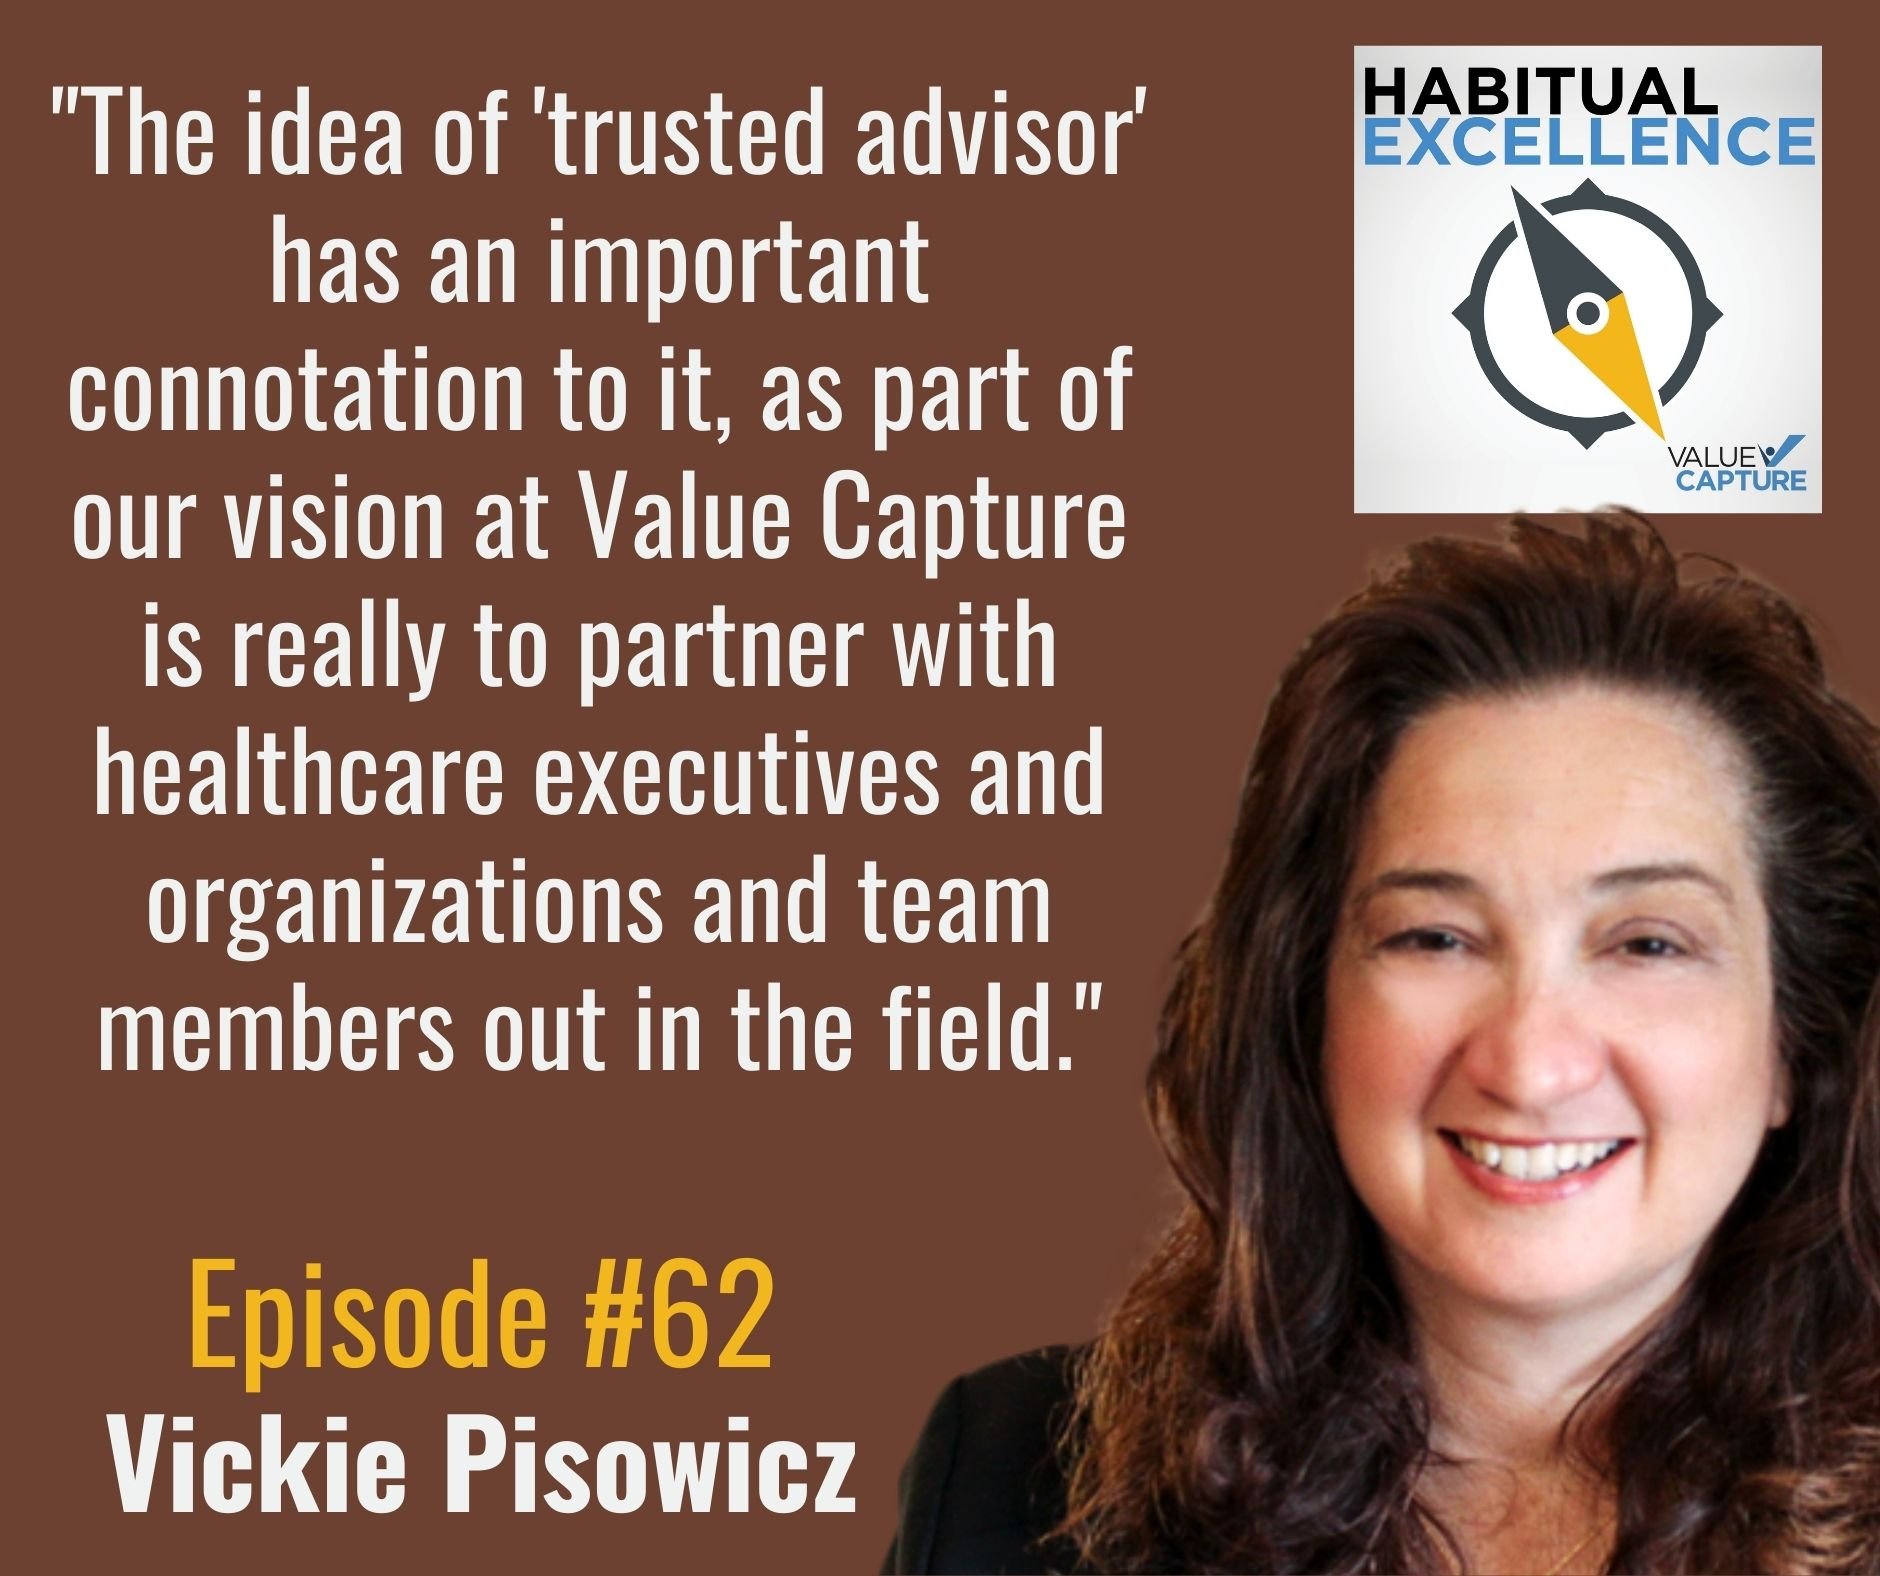 "The idea of 'trusted advisor' has an important connotation to it, as part of our vision at Value Capture is really to partner with healthcare executives and organizations and team members out in the field."